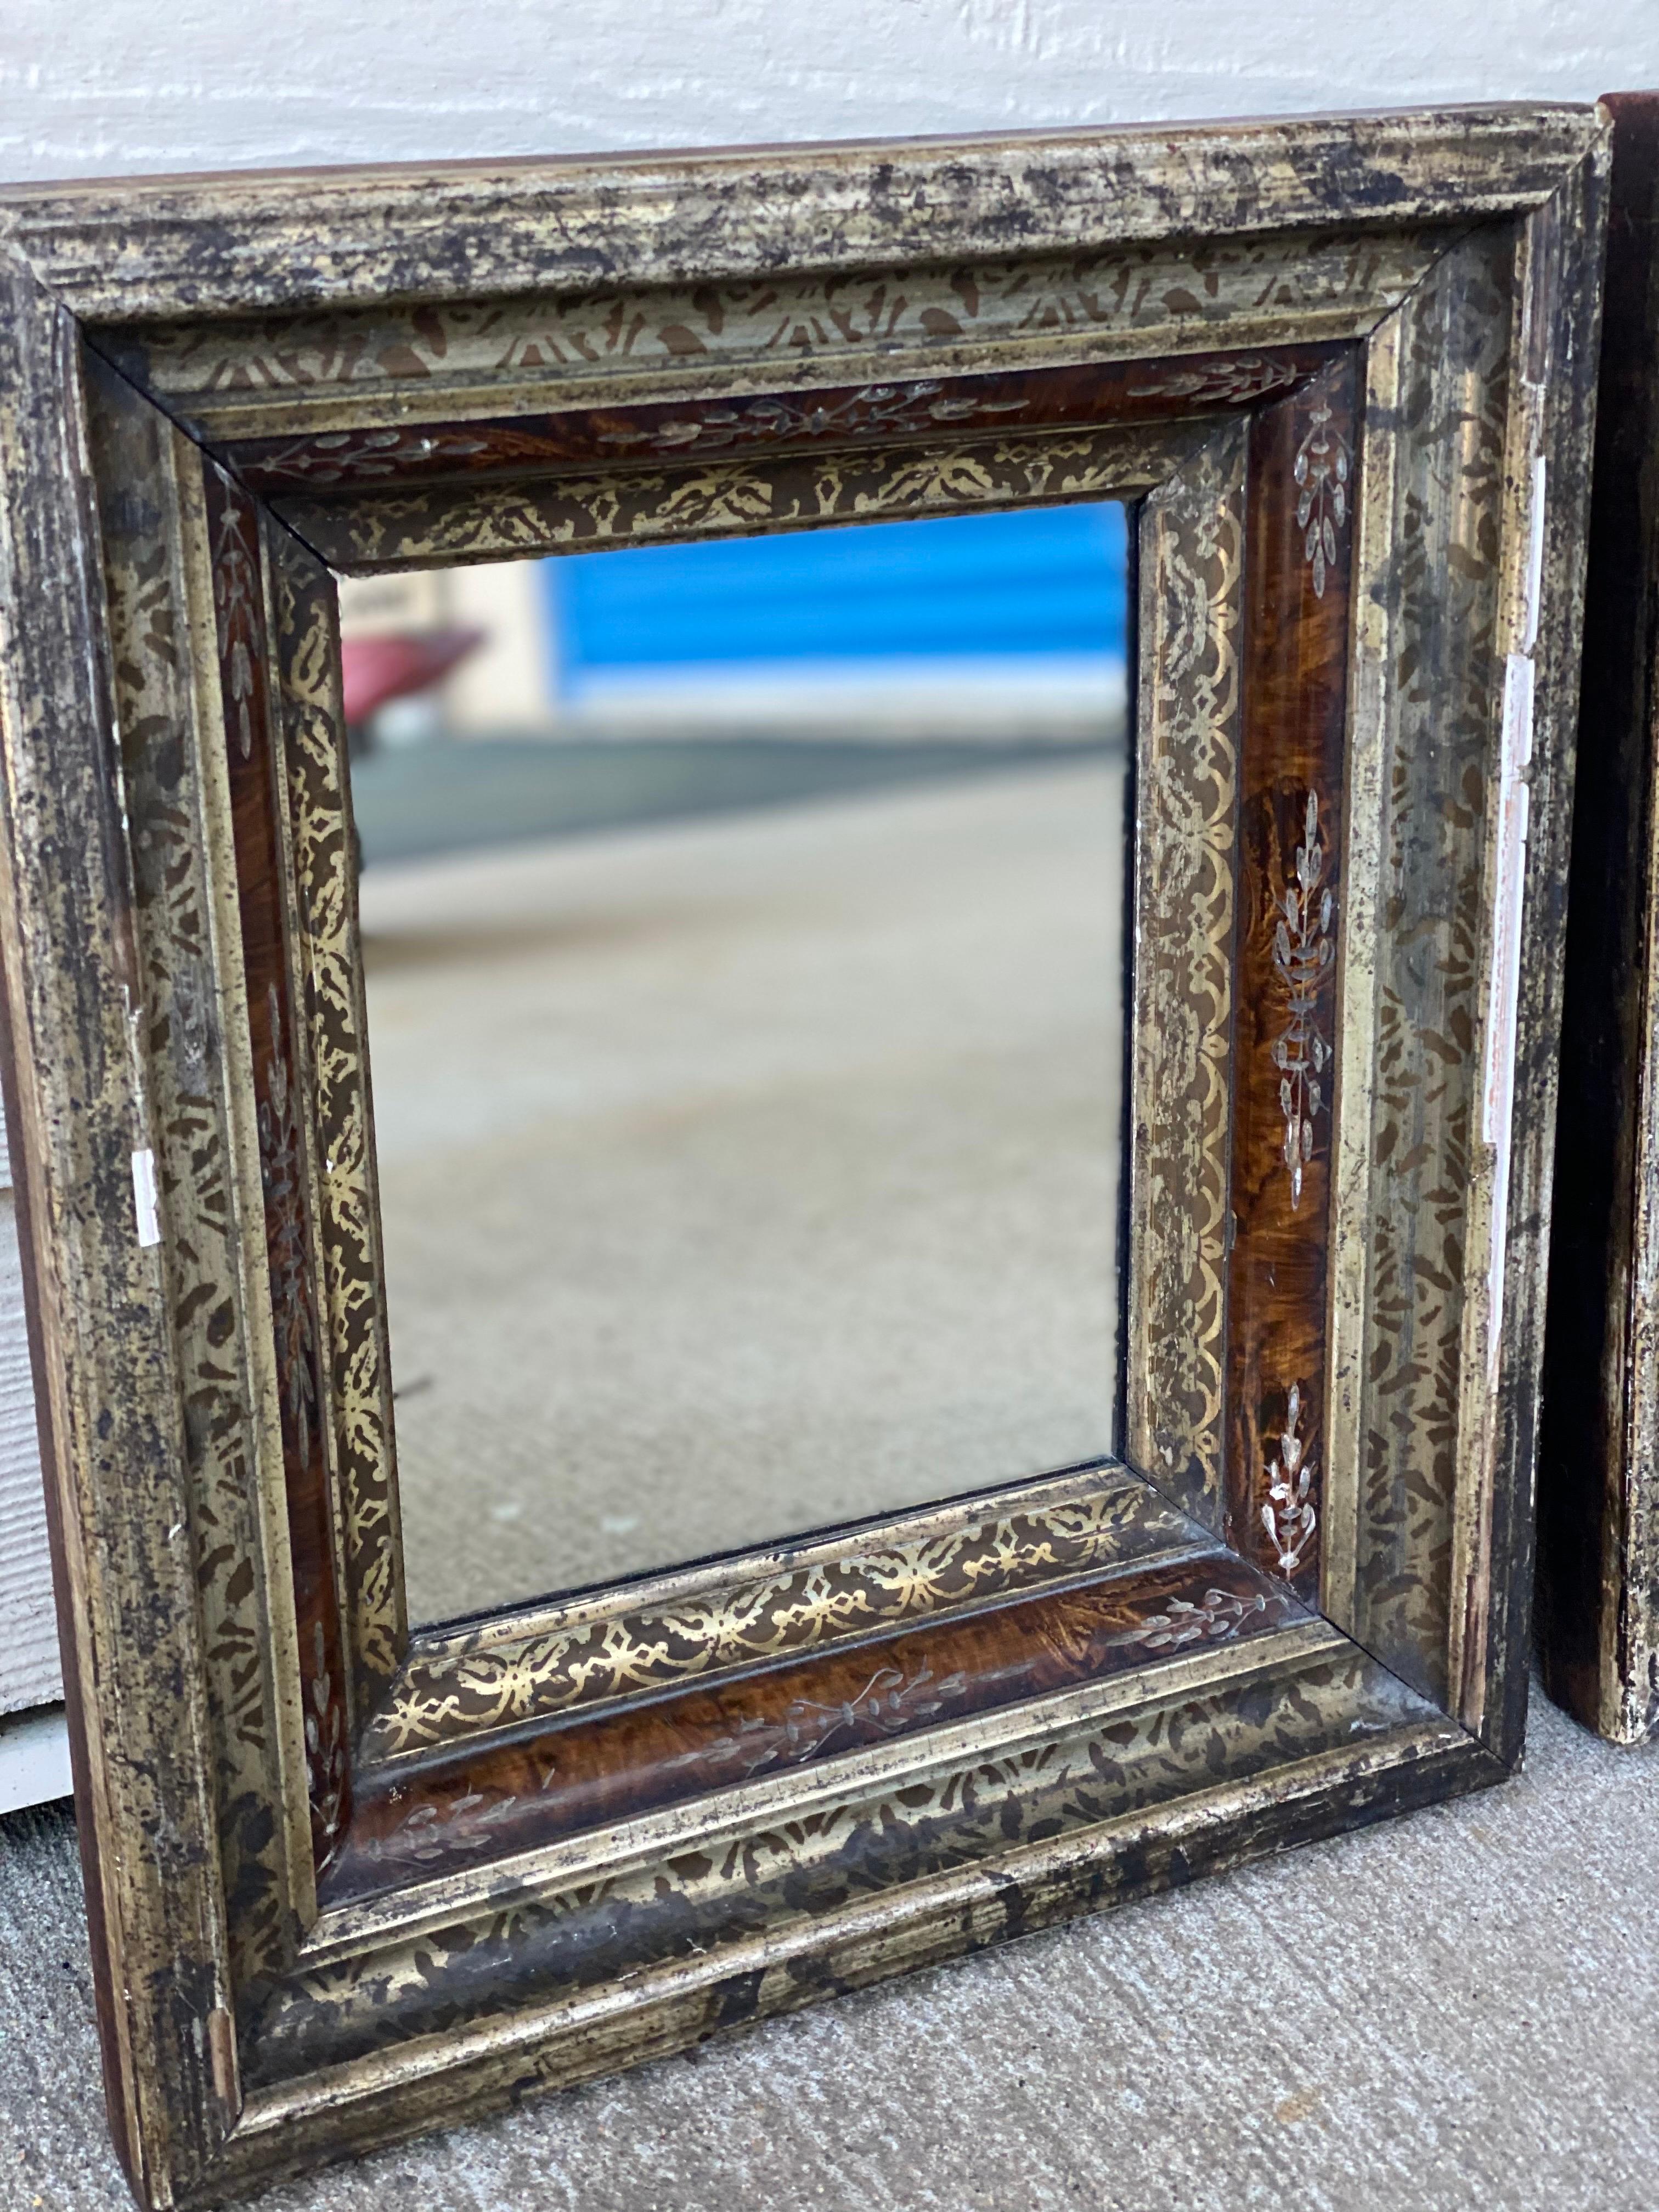 Pair of 19th Century Small Silver-Gilt & Faux Tortoise Shell Patterned Mirrors For Sale 7